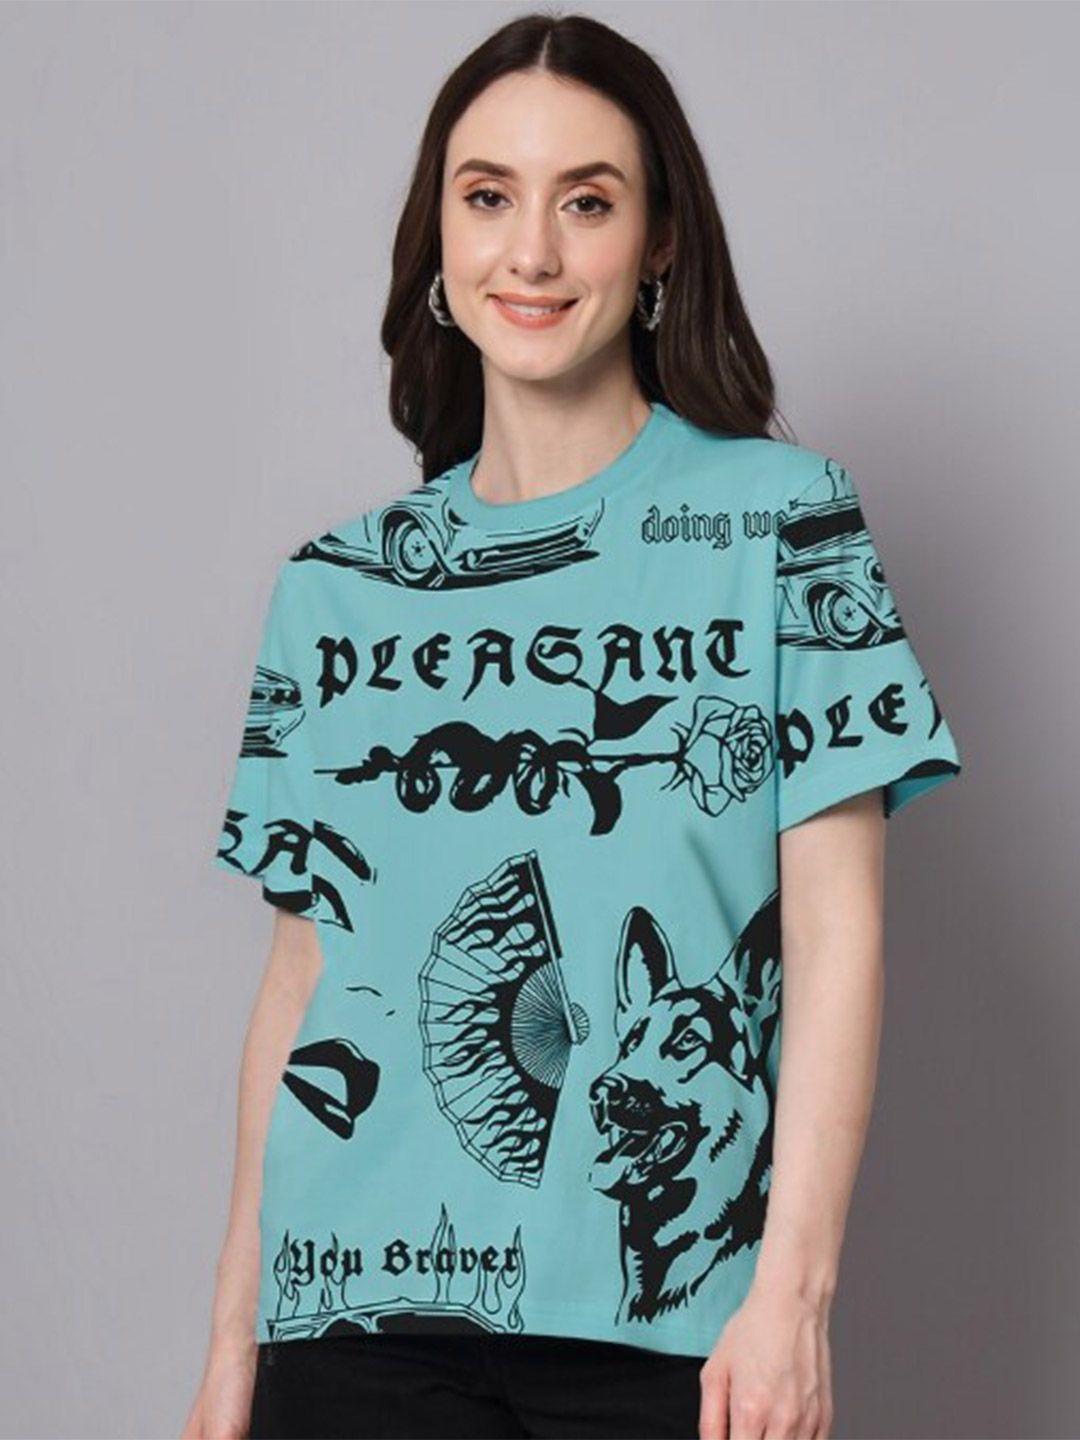 the dry state turquoise blue graphic printed cotton oversize fit t-shirt